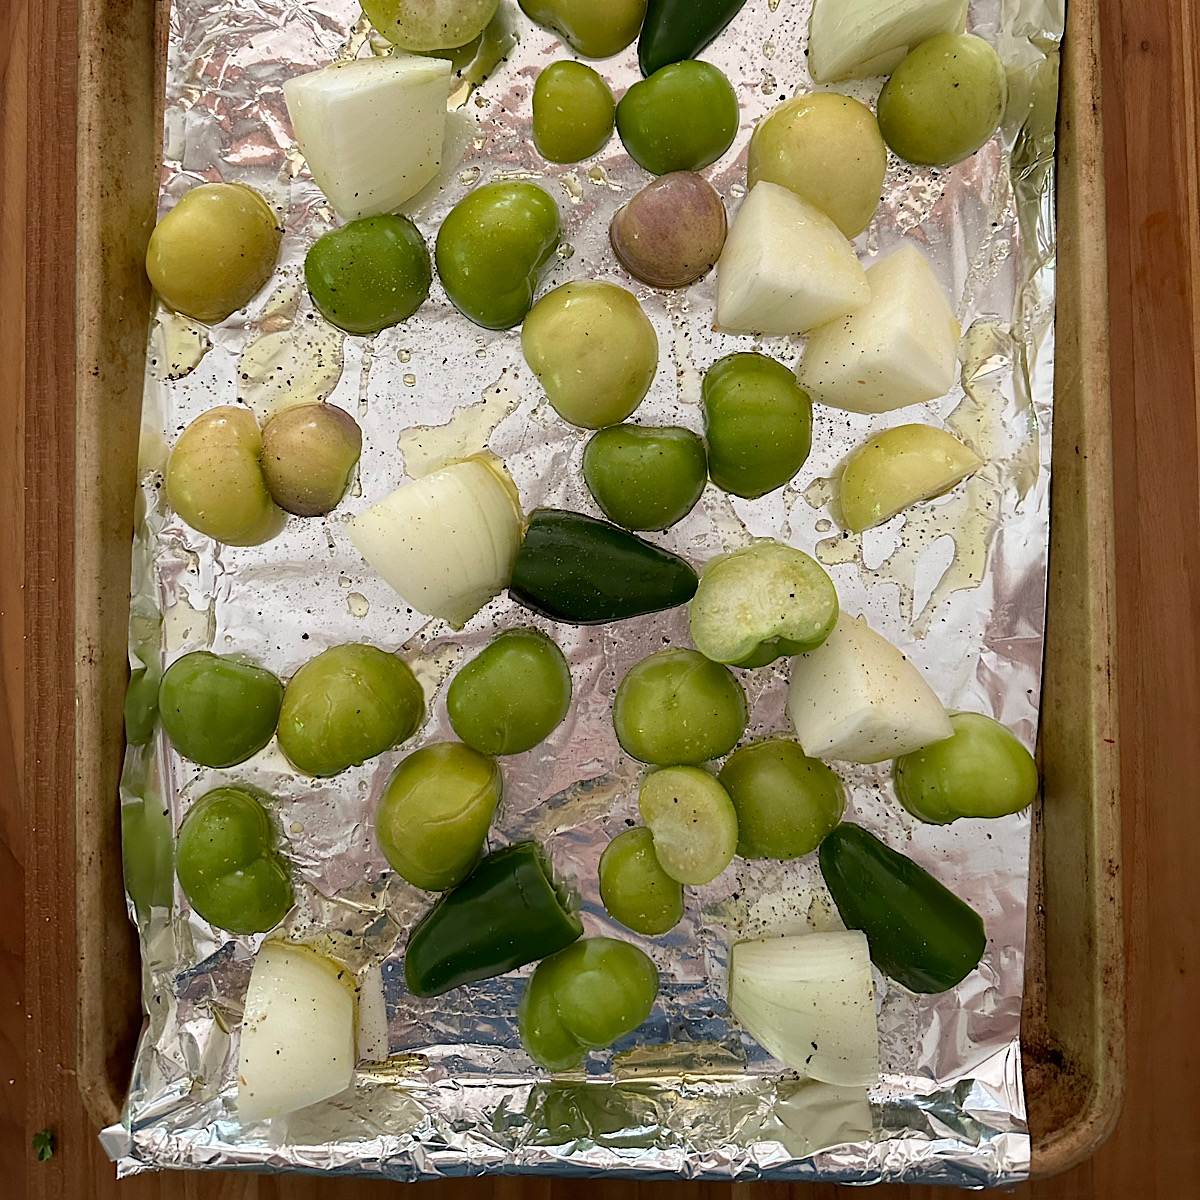 Tomatillos, jalapenos and onions on a baking sheet lined with foil.